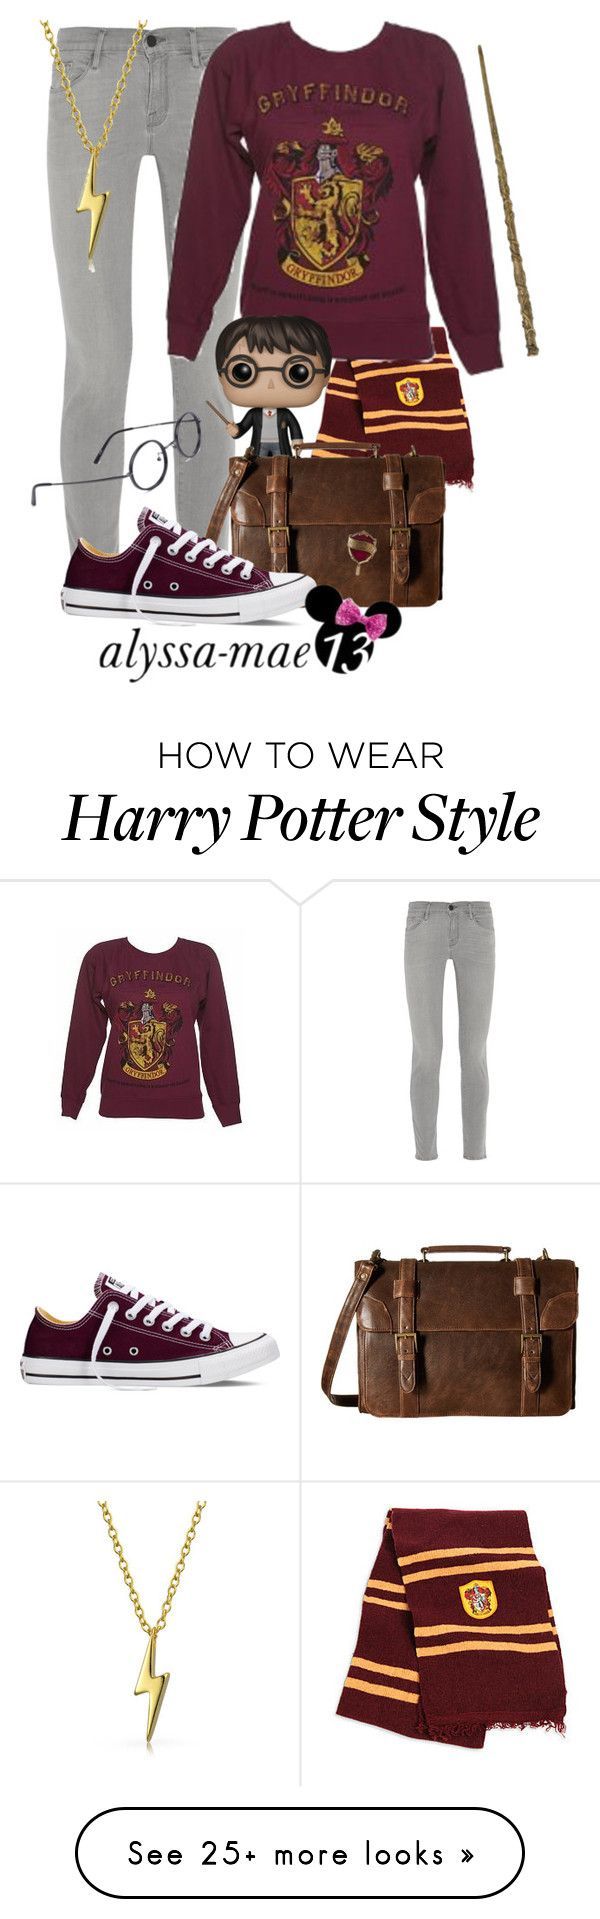 “Harry Potter // DisneyBound // Harry Potter” by alyssa-mae13 on Polyvore featuring Frame Denim, FunKo, Scully, Converse, Bling